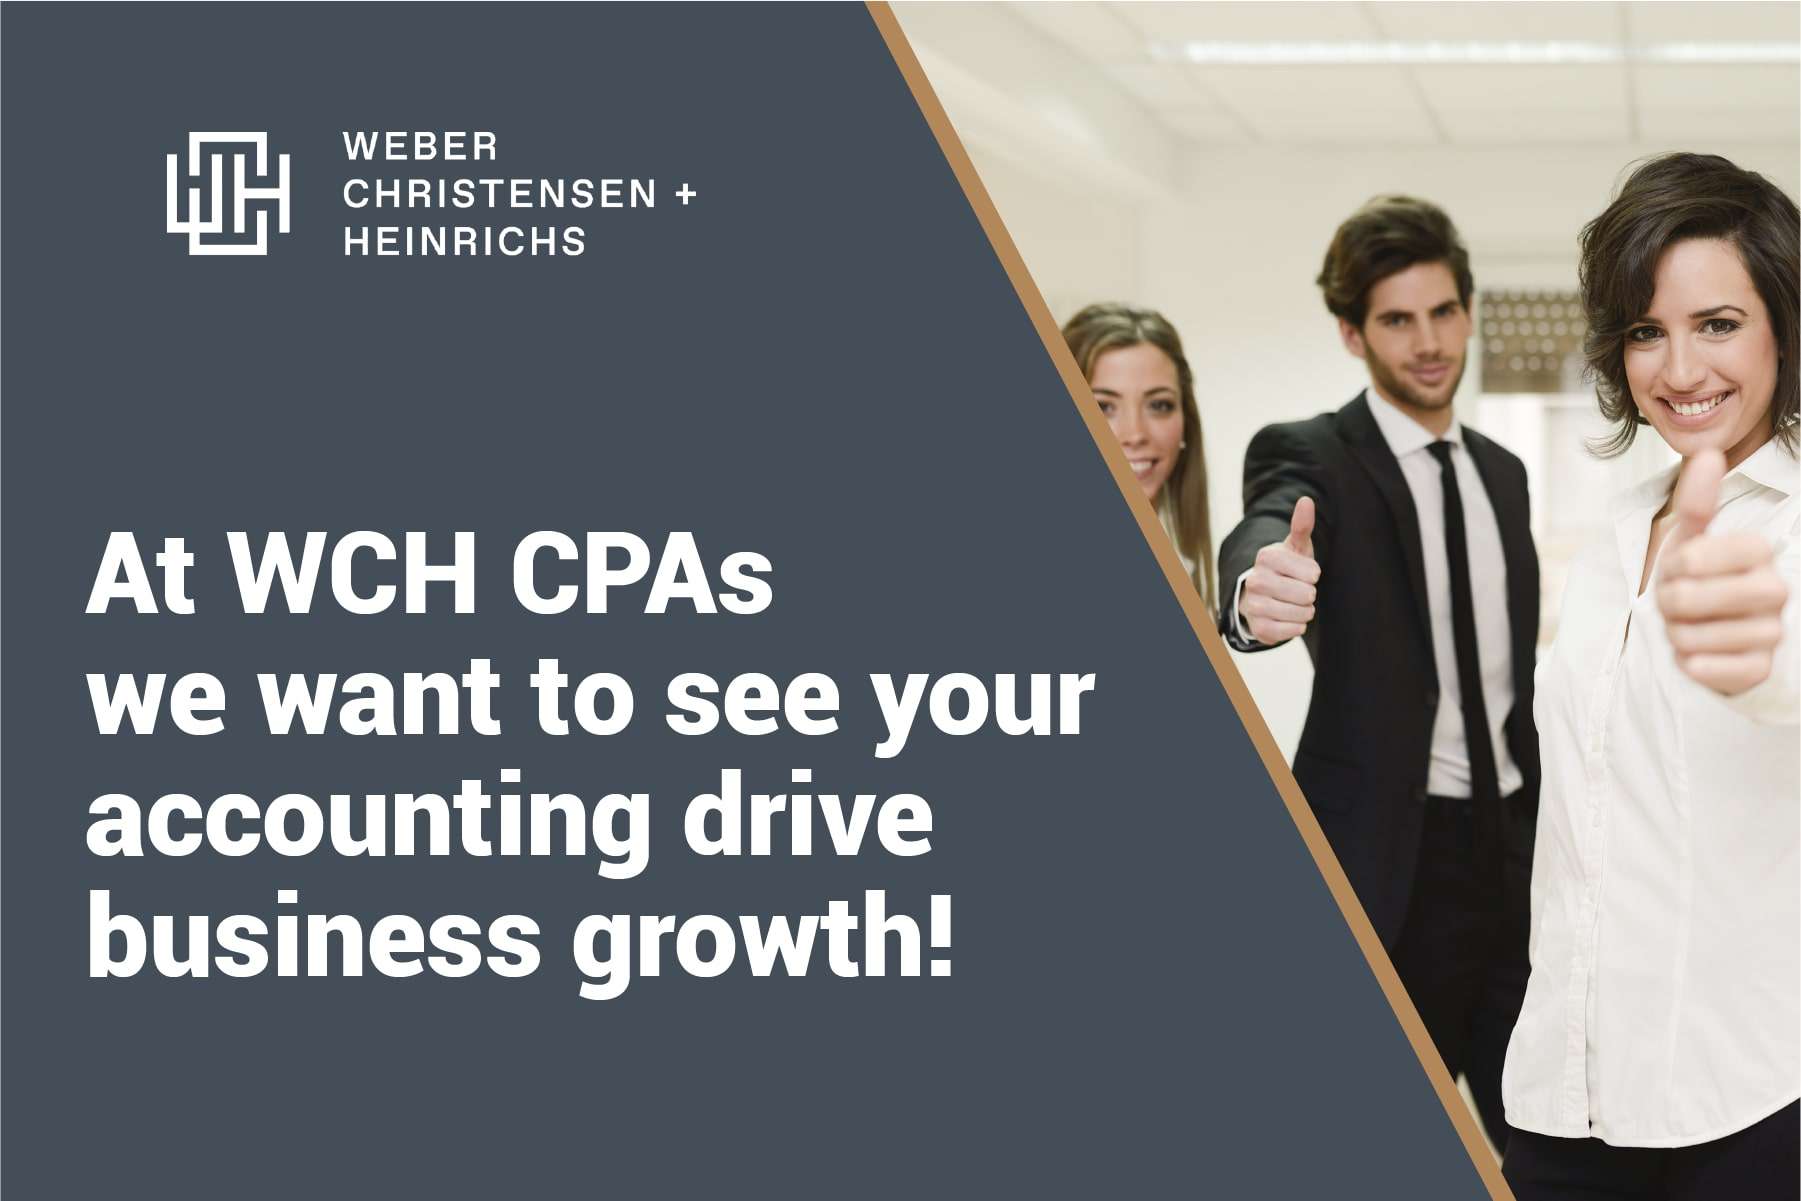 At WCH CPA we can help your business grow